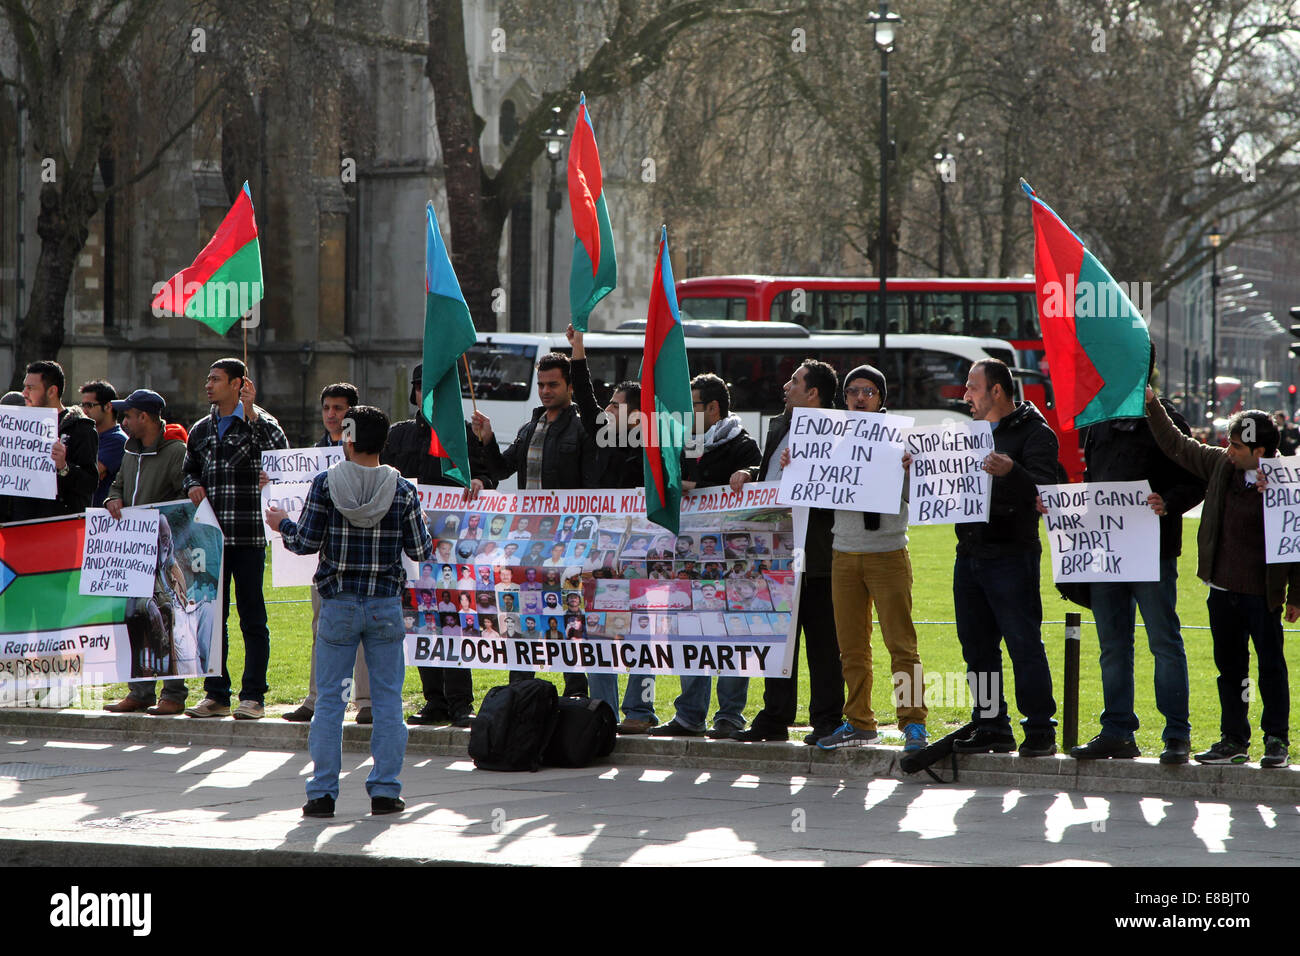 Protesters from the Baloch Republican Party demonstrate on Parliament Square, opposite the Palace of Westminster in London Stock Photo